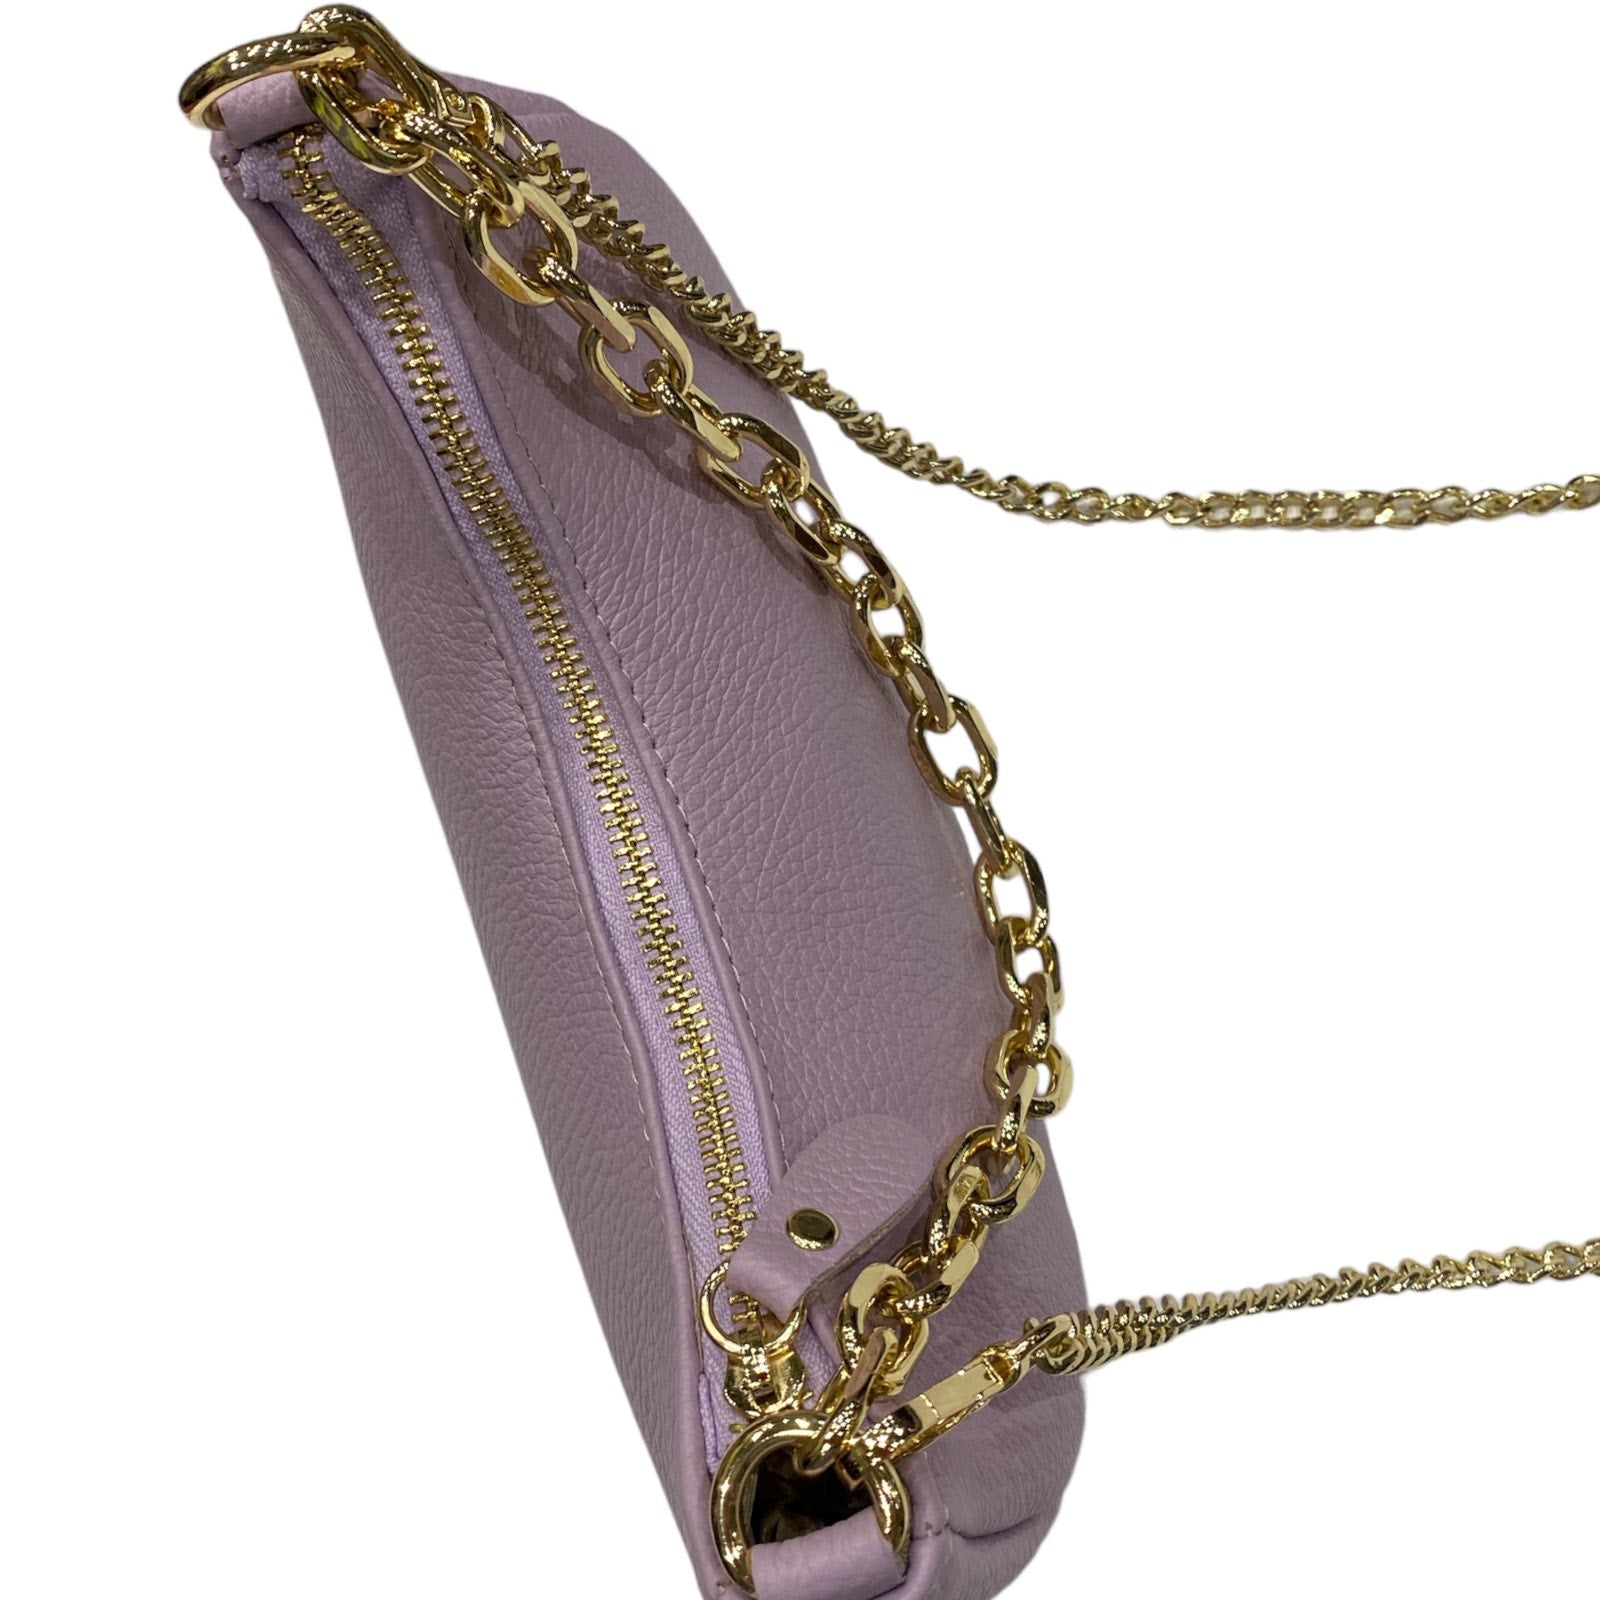 Lilac leather moon evening bag